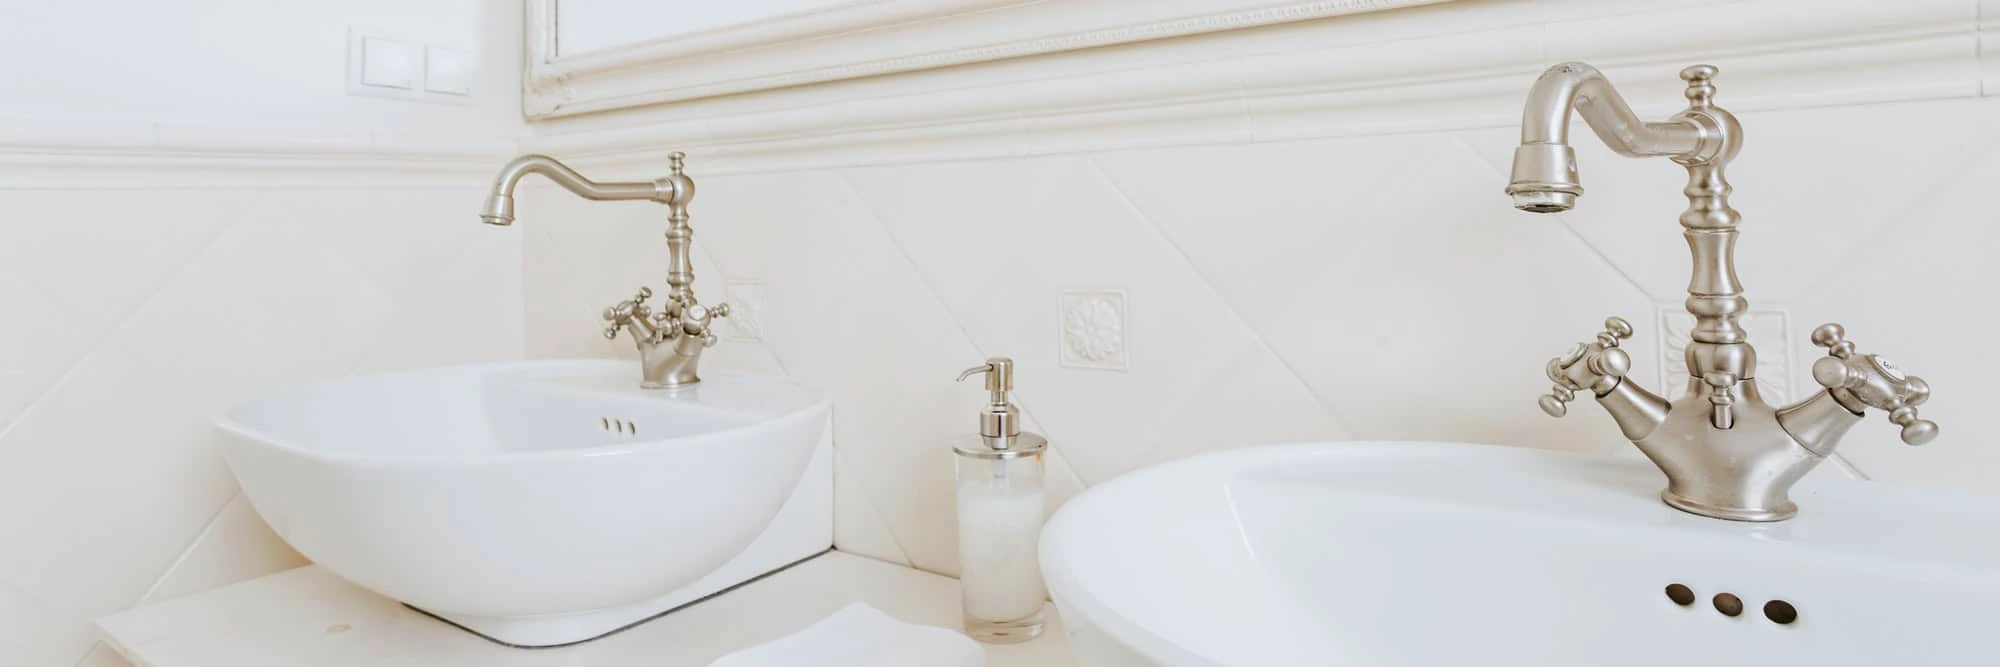 Washbasins with vintage style faucets